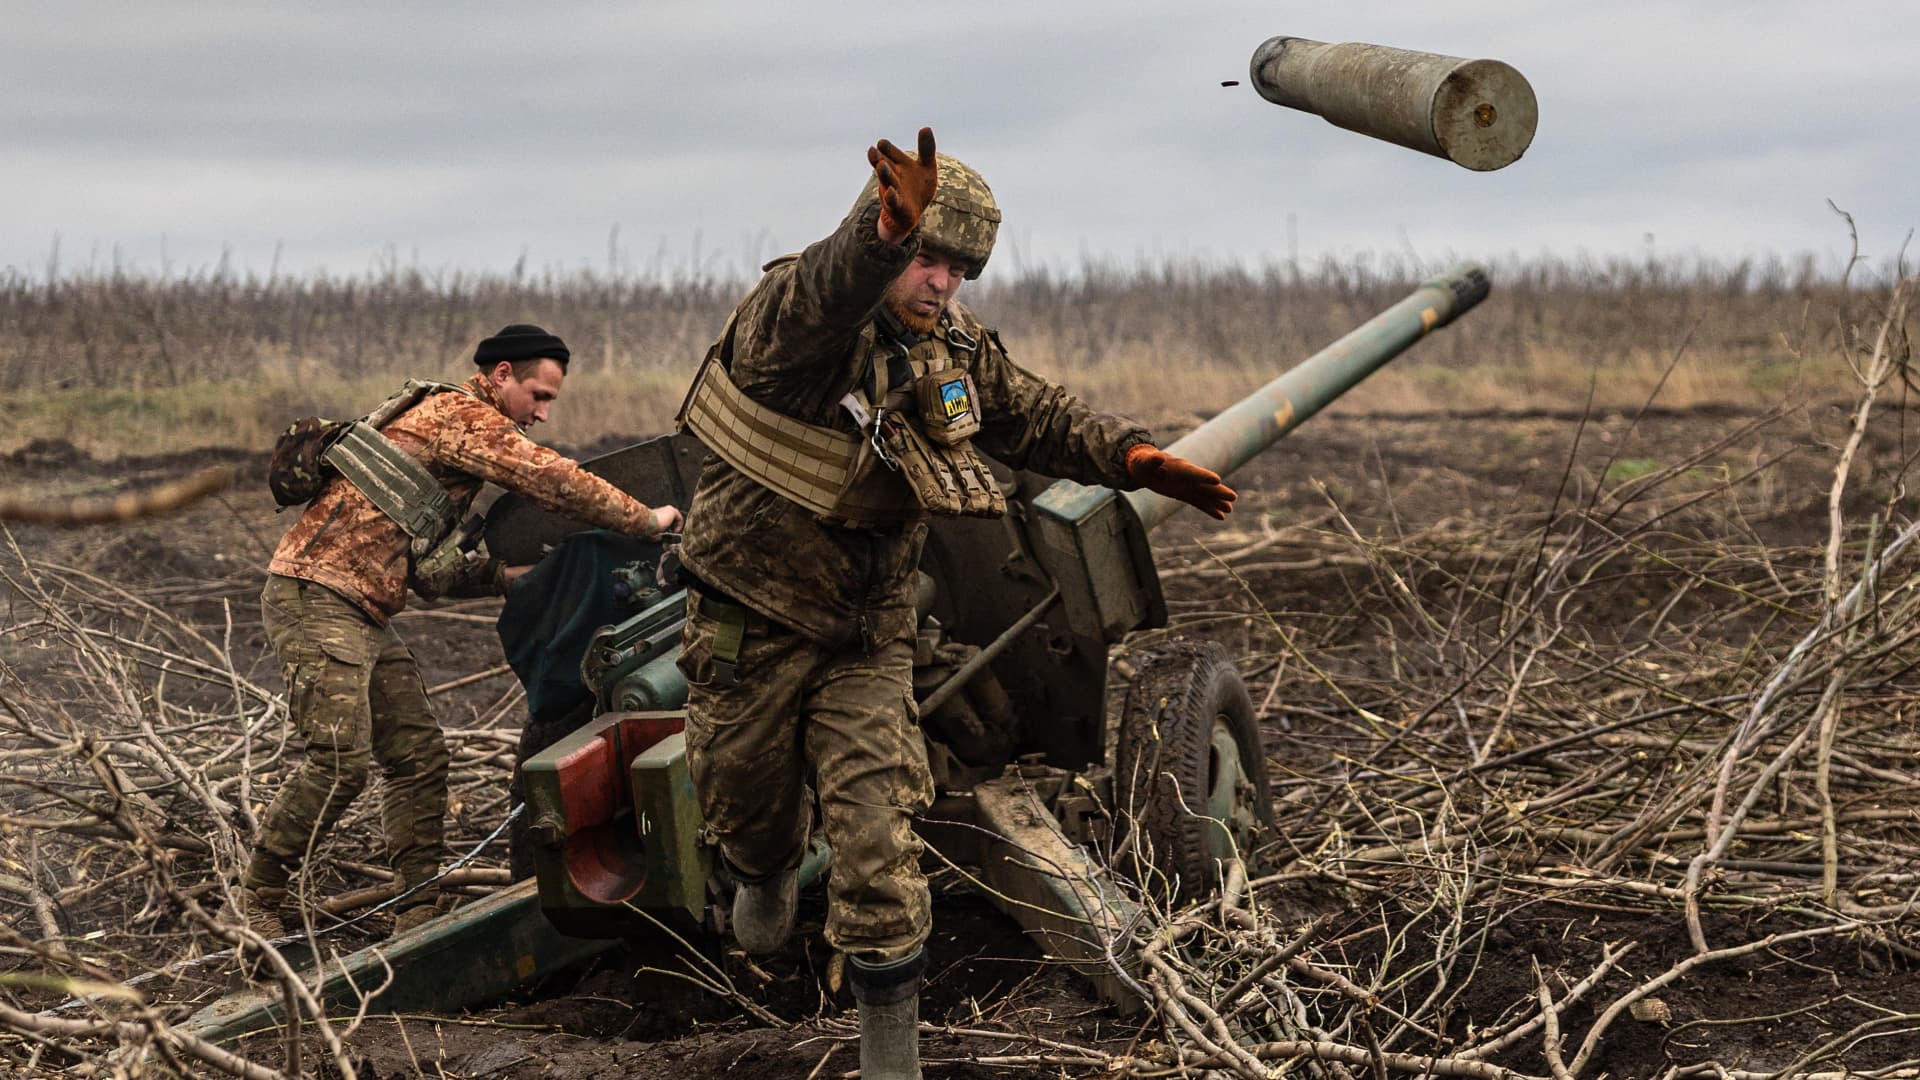 A Ukrainian serviceman of an artillery unit throws an empty shell as they fire towards Russian positions on the outskirts of Bakhmut, eastern Ukraine on December 30, 2022.